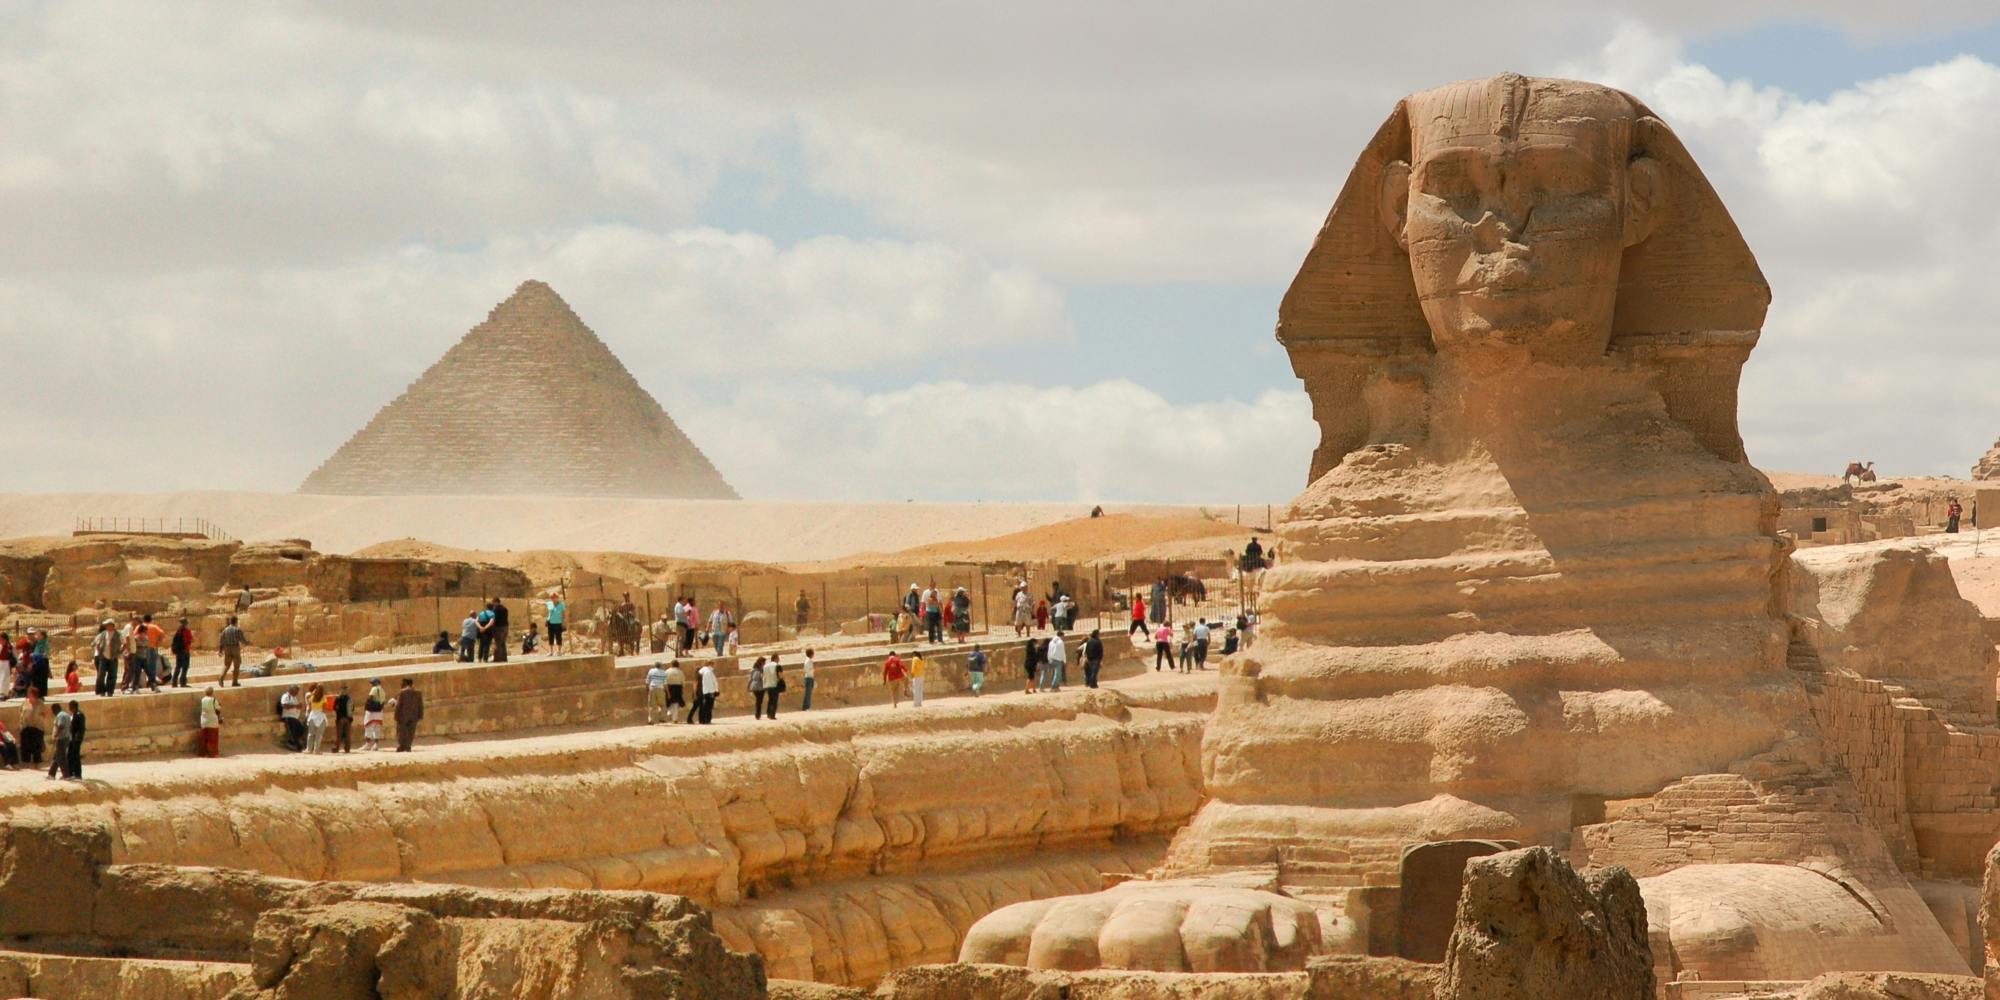 Giza Pyramids Sphinx and Egyptian Museum tour with lunch from Dahab Musement